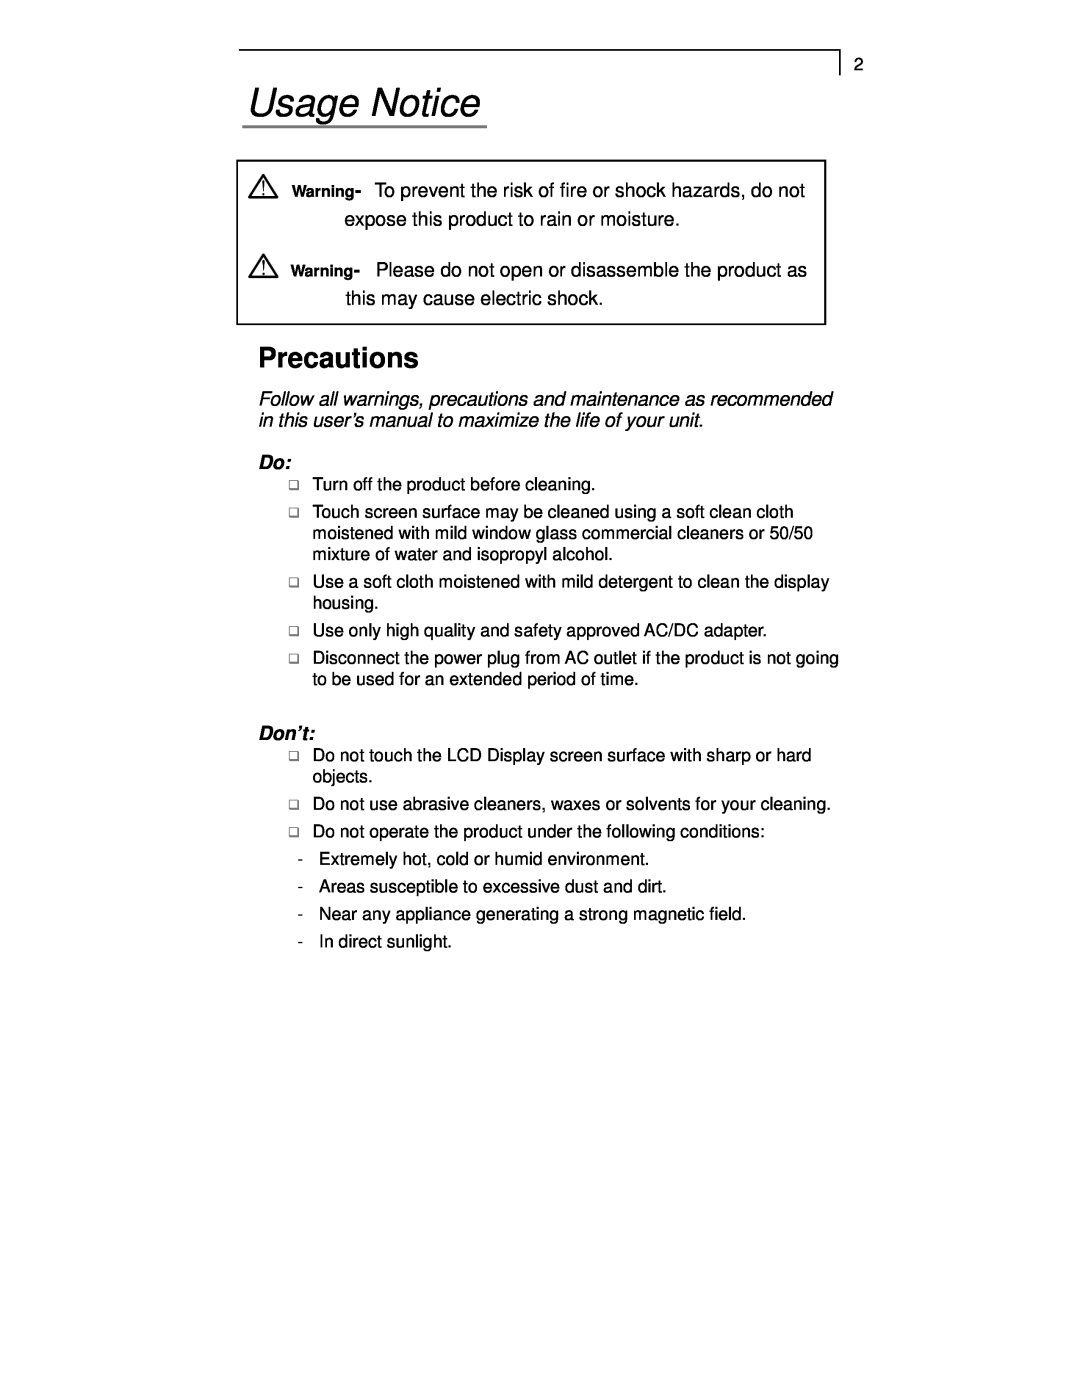 Planar PT1915MU, PT1910MX Usage Notice, Precautions, Warning- To prevent the risk of fire or shock hazards, do not, Don’t 